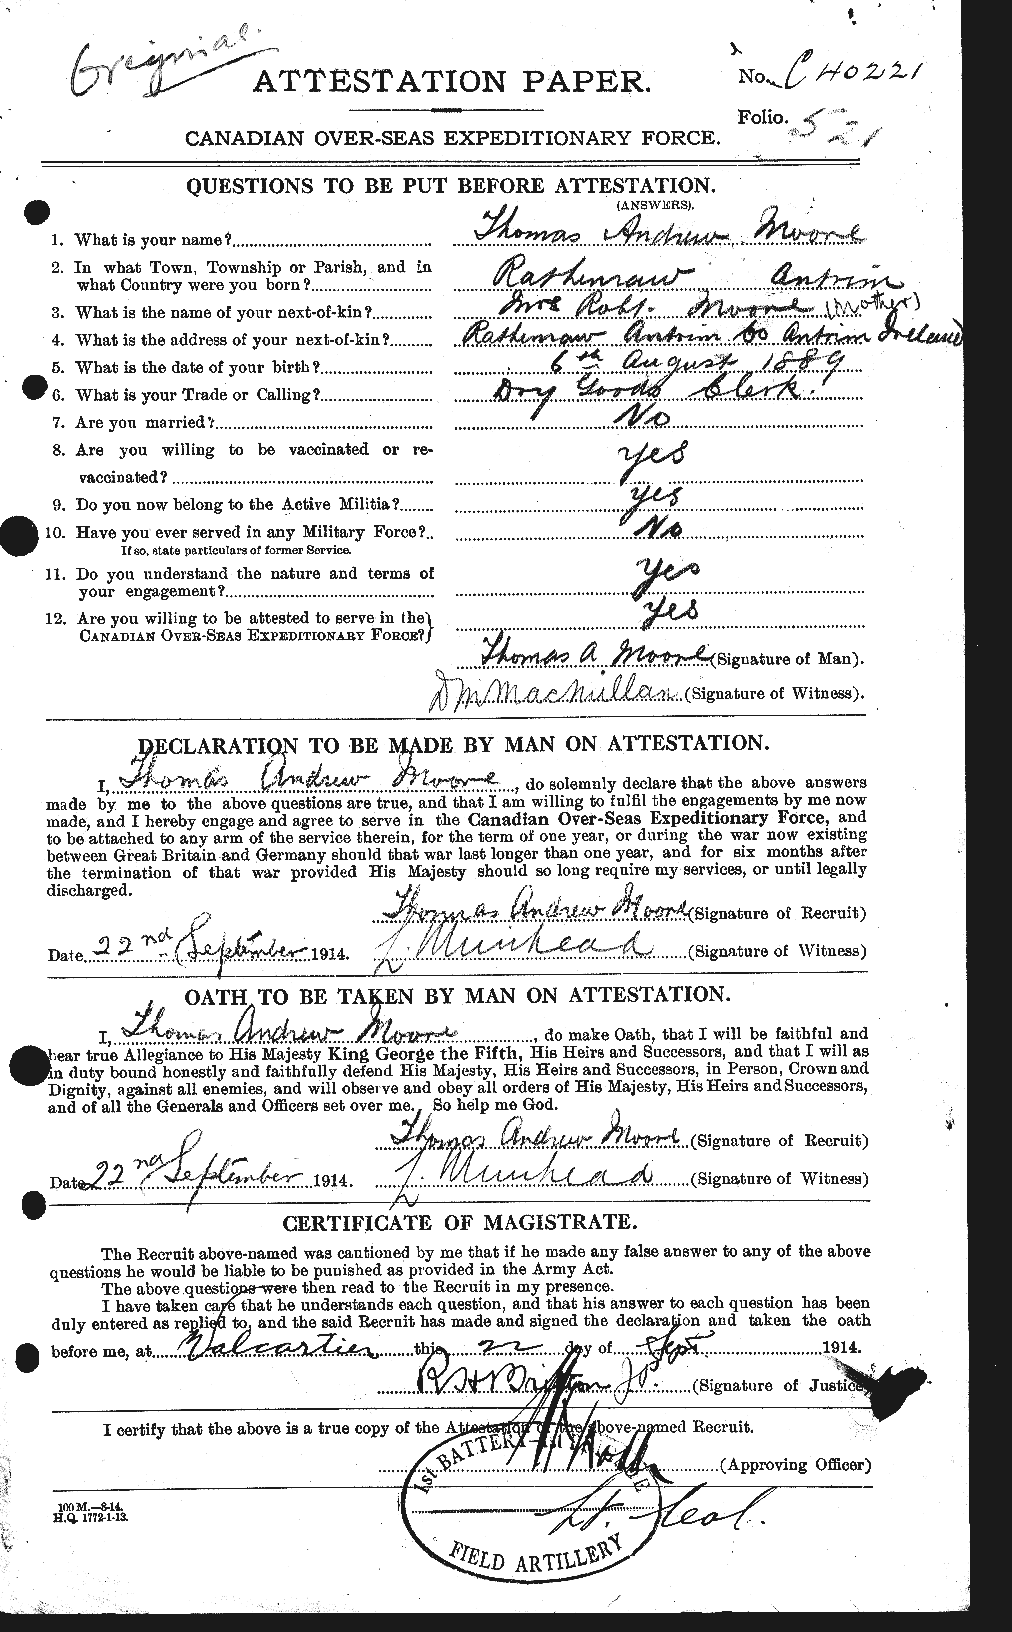 Personnel Records of the First World War - CEF 505641a